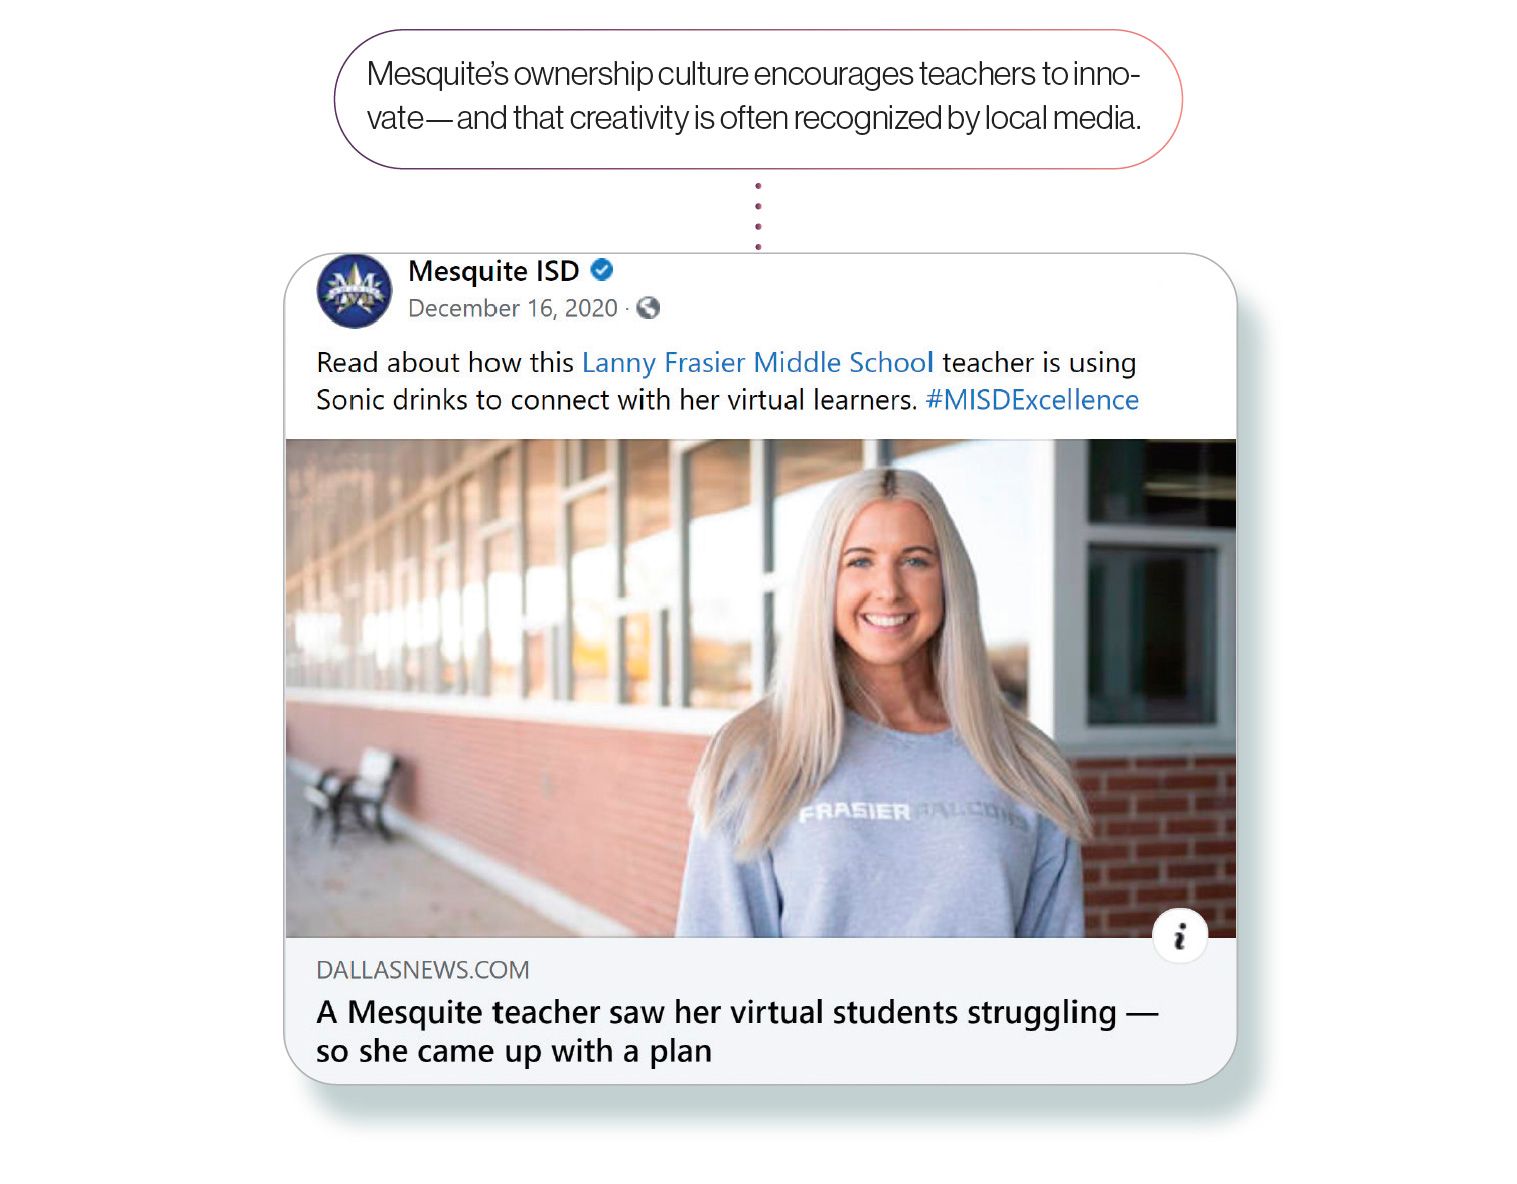 Image: A Facebook post by Mesquite ISD sharing a Dallas News story highlighting one of their teachers, with the SchoolCEO caption 'Mesquite’s ownership culture encourages teachers to innovate—and that creativity is often recognized by local media.'